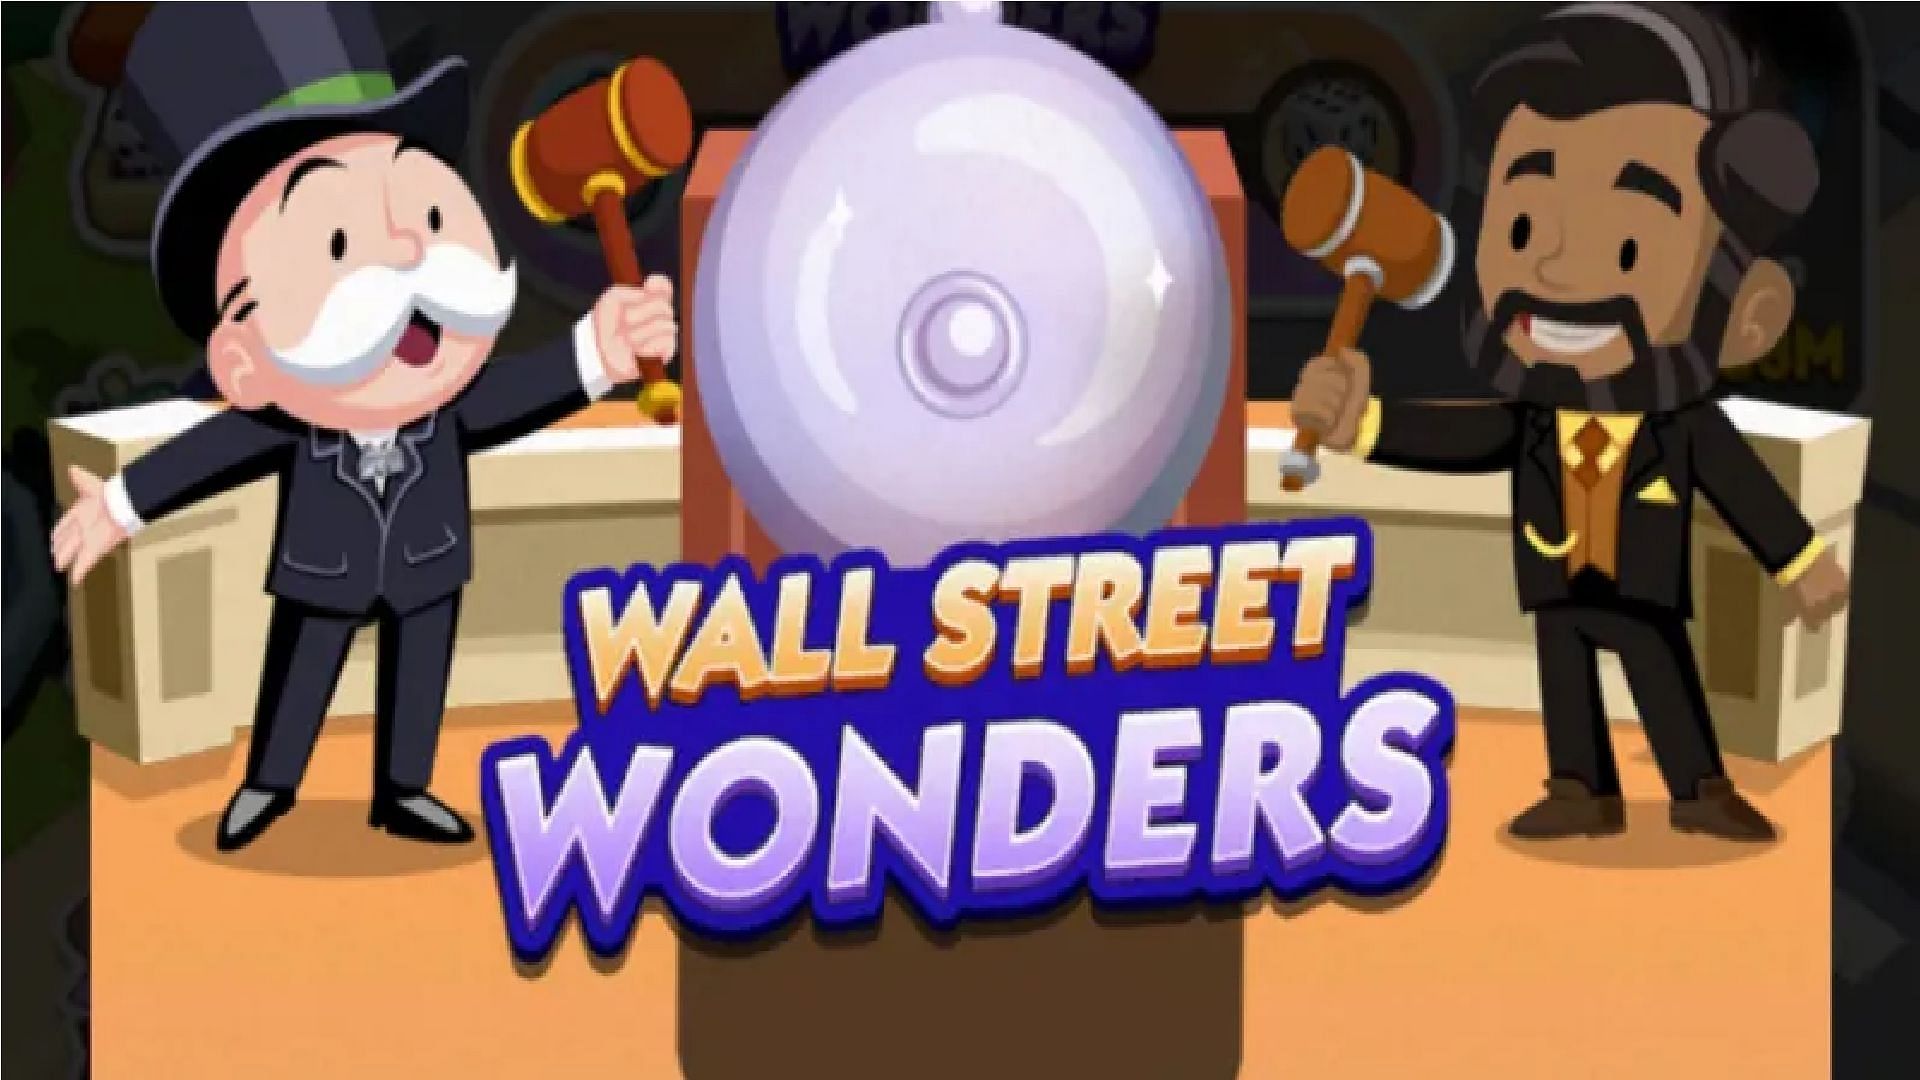 Wall Street Wonders in Monopoly Go All rewards, schedule, and more